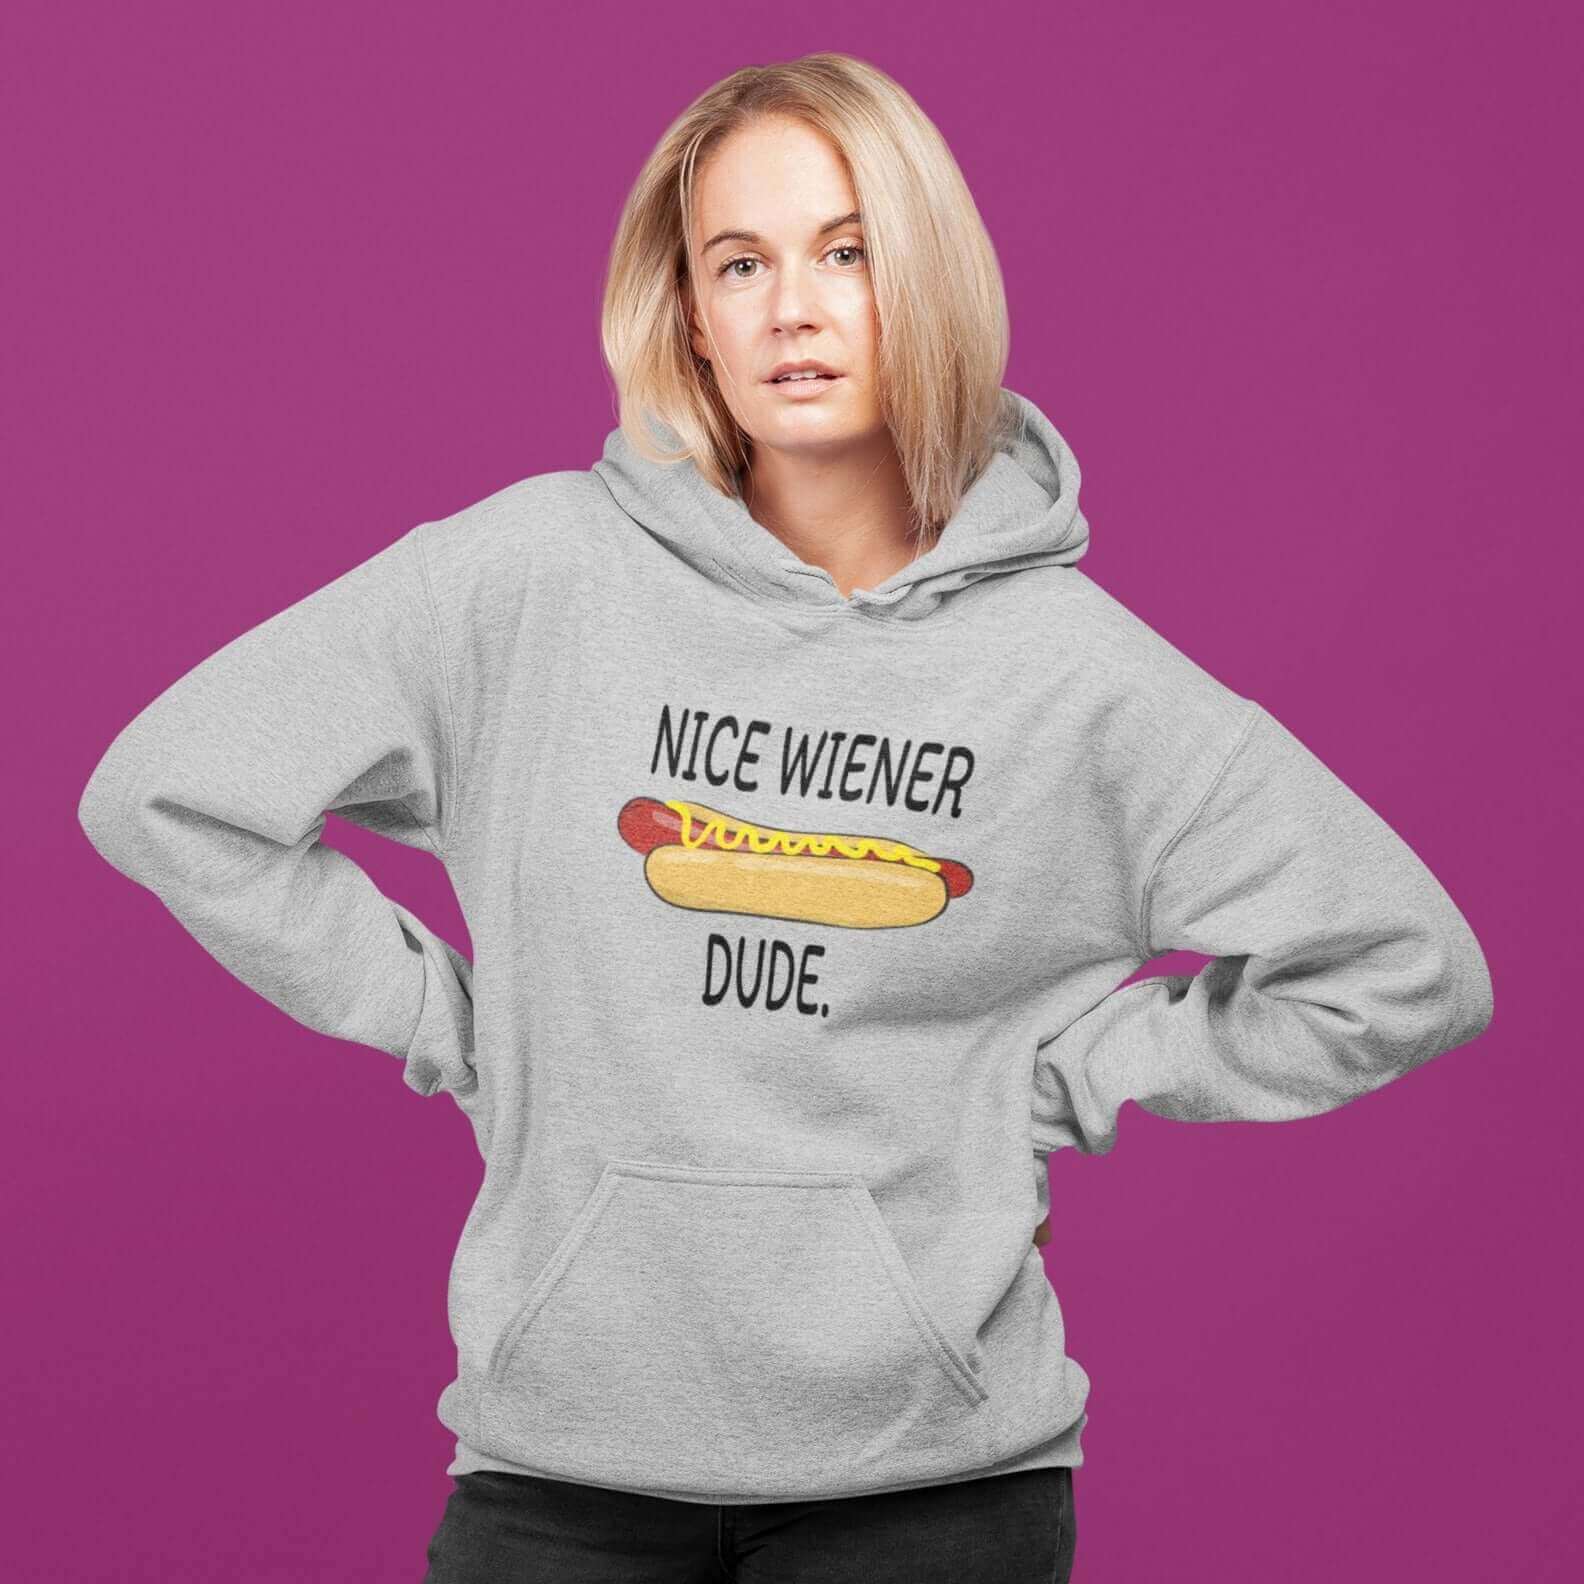 Woman wearing a light grey hoodie sweatshirt with an image of a hotdog and the phrase Nice wiener dude printed on the front.